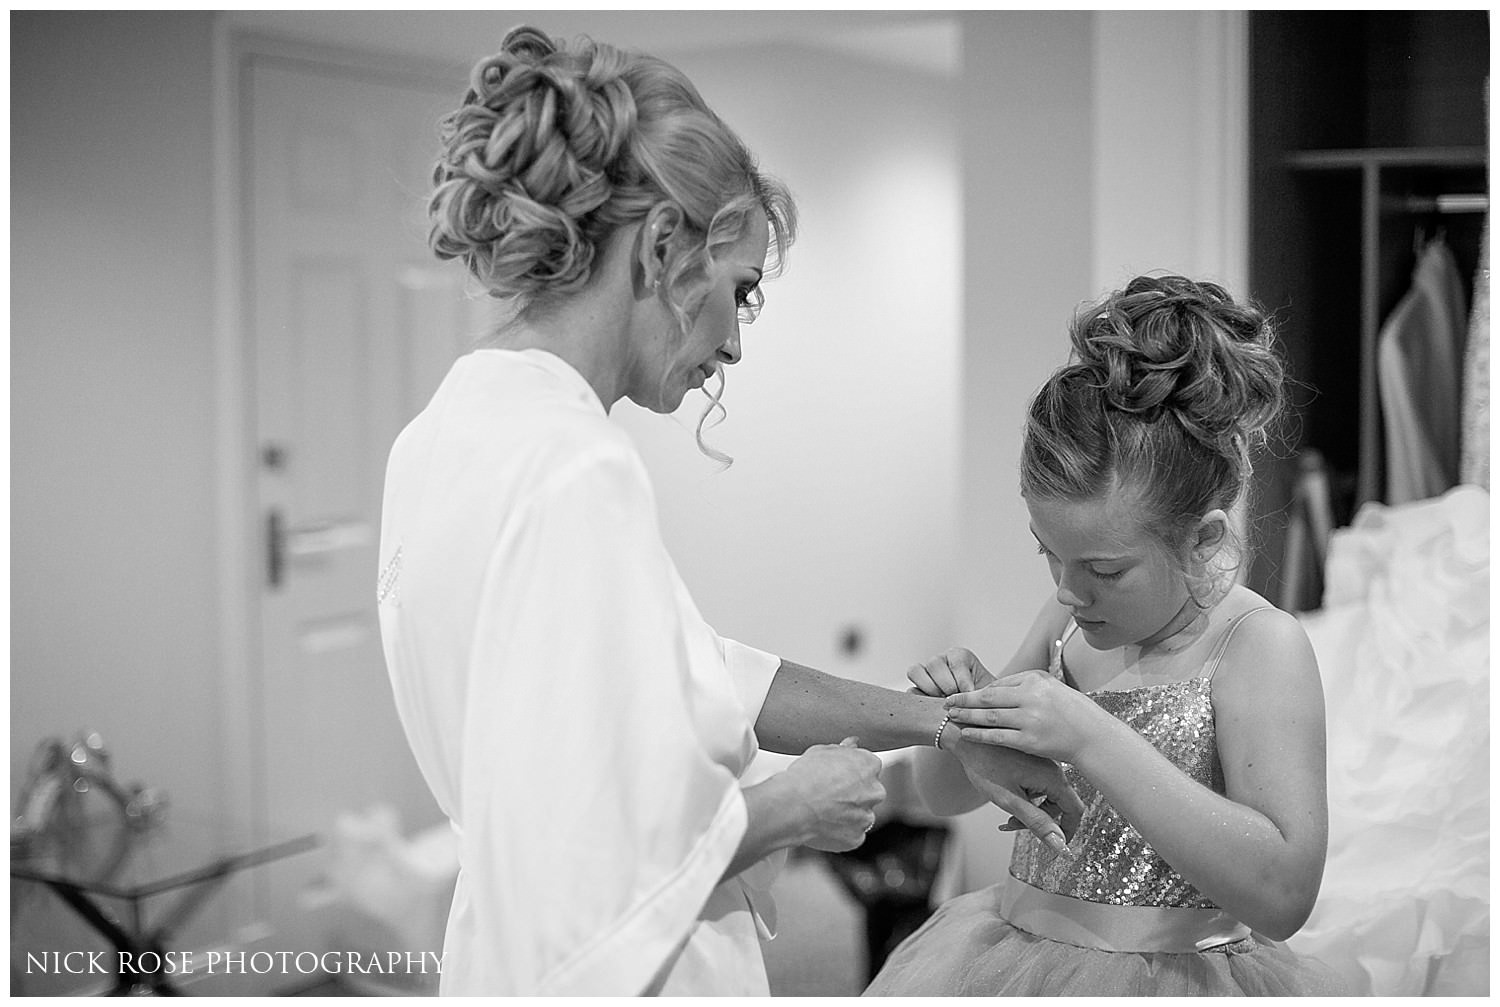  Brides daughter putting a bracelet on the bride before a wedding ceremony at St Mary's Church in Tickhill &nbsp; 